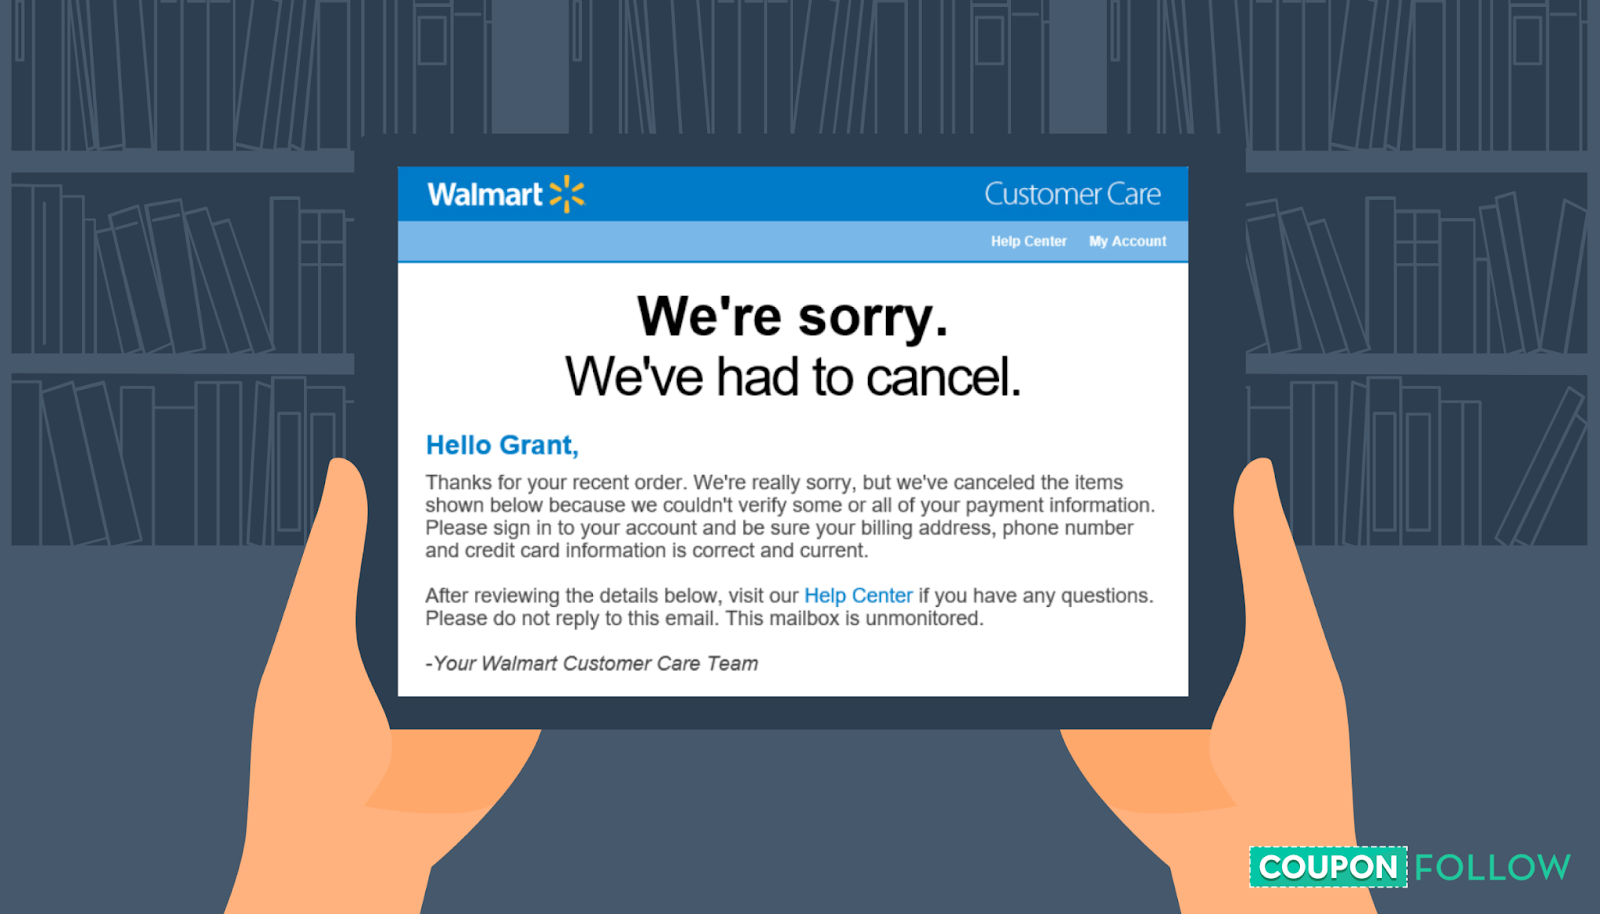 Illustration of person holding phone with apology email from Walmart on-screen